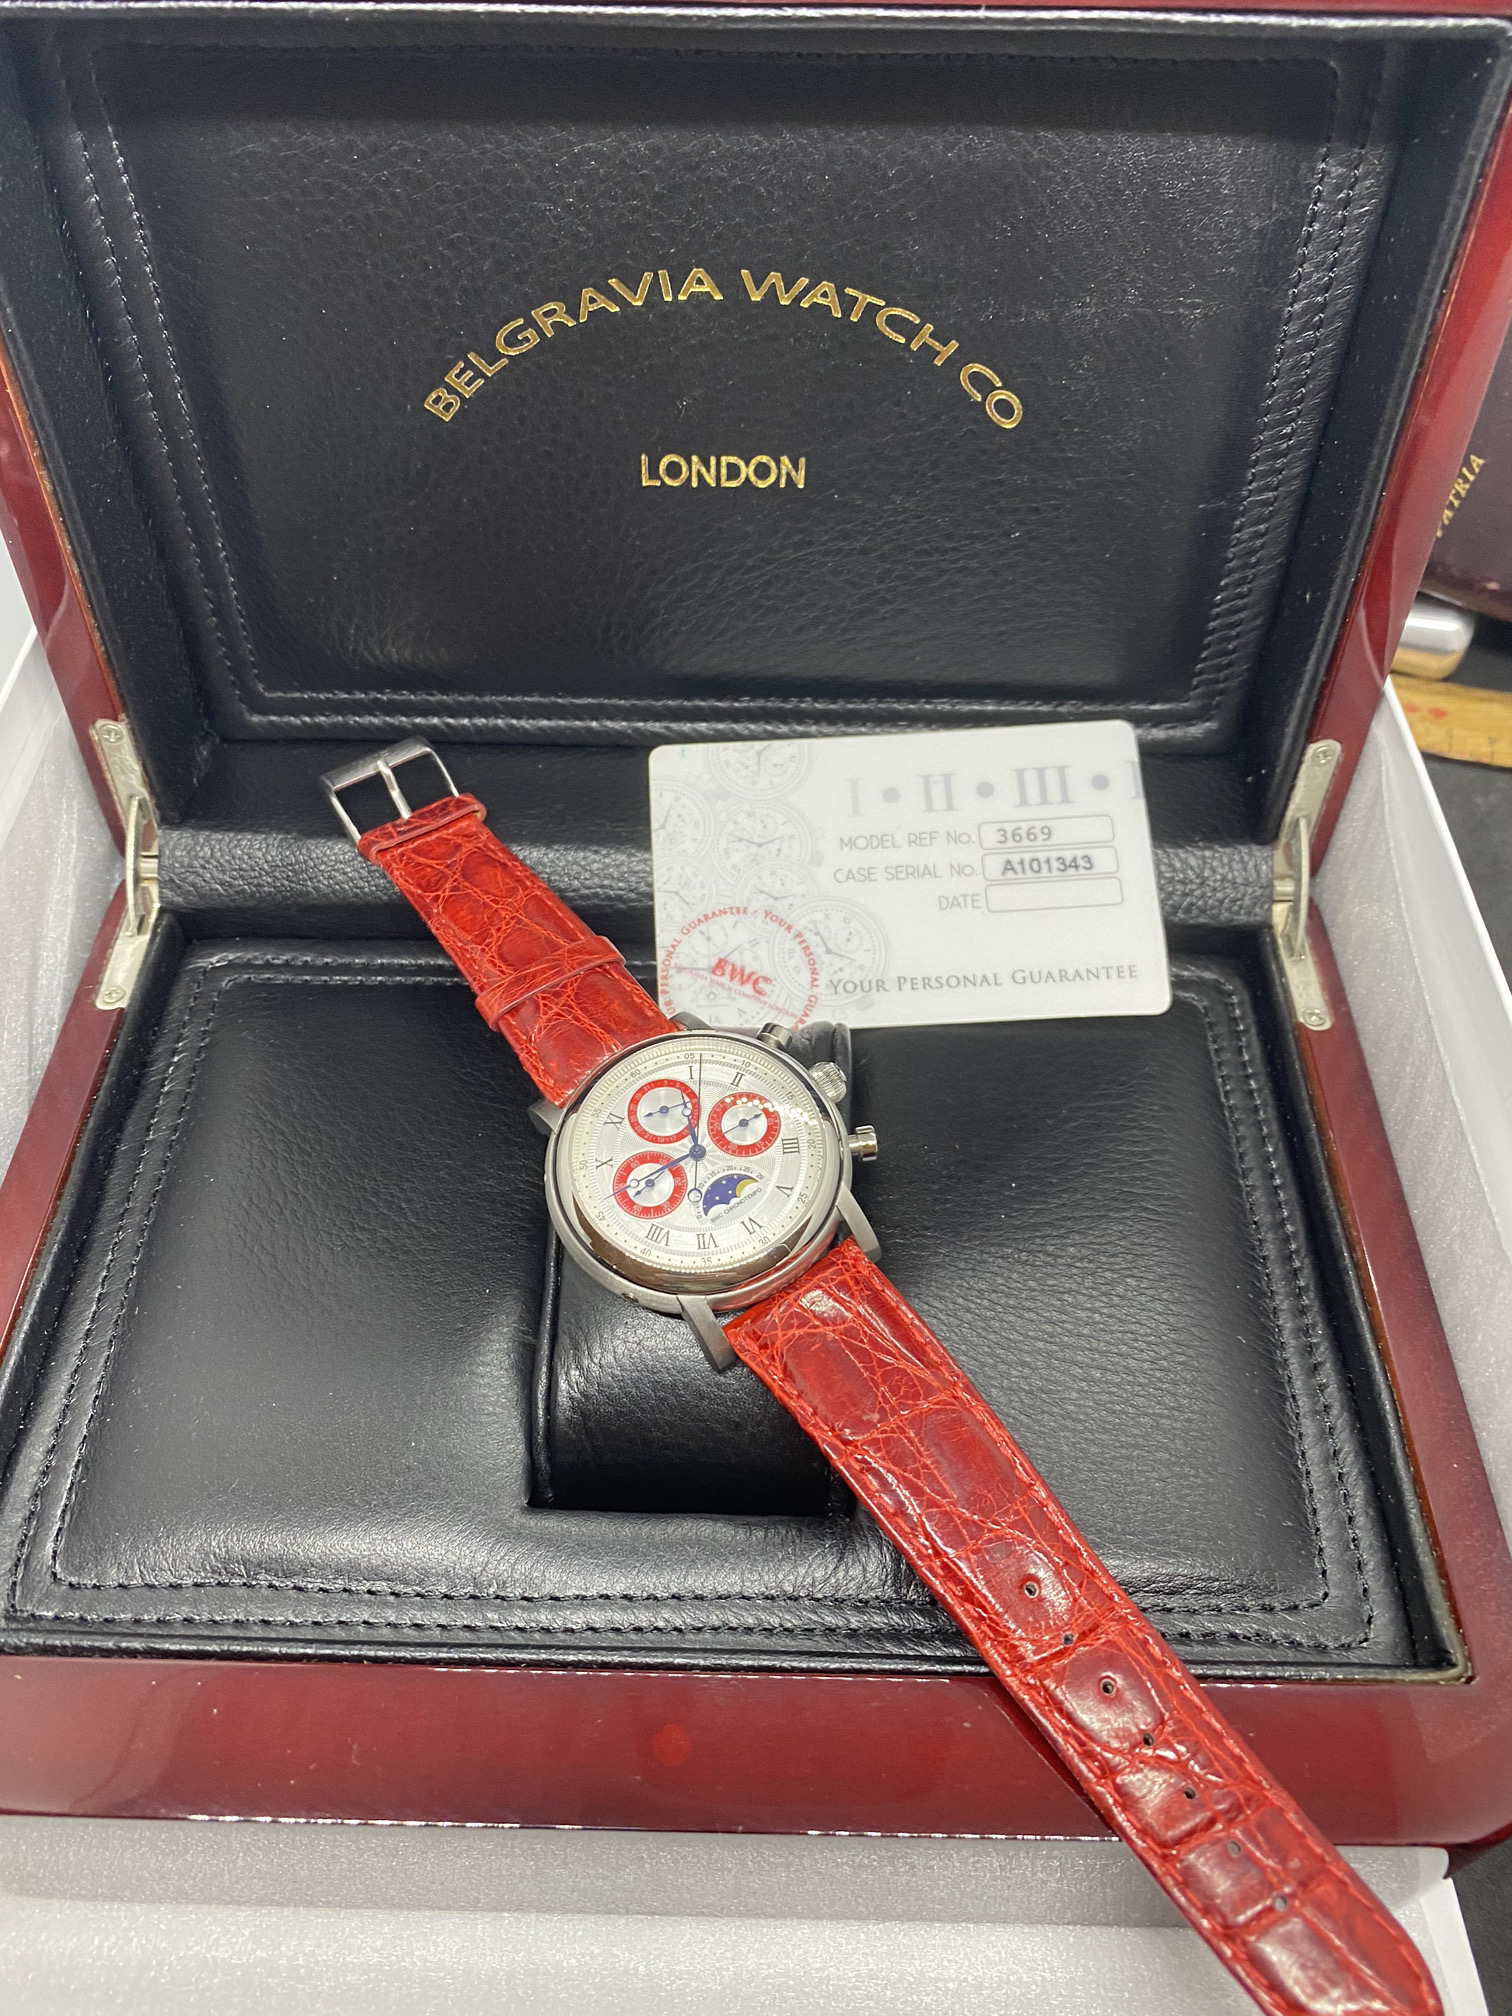 BELGRAVIA WATCH CO CHRONO WATCH BOXED WITH AUTH CARD - Image 2 of 6